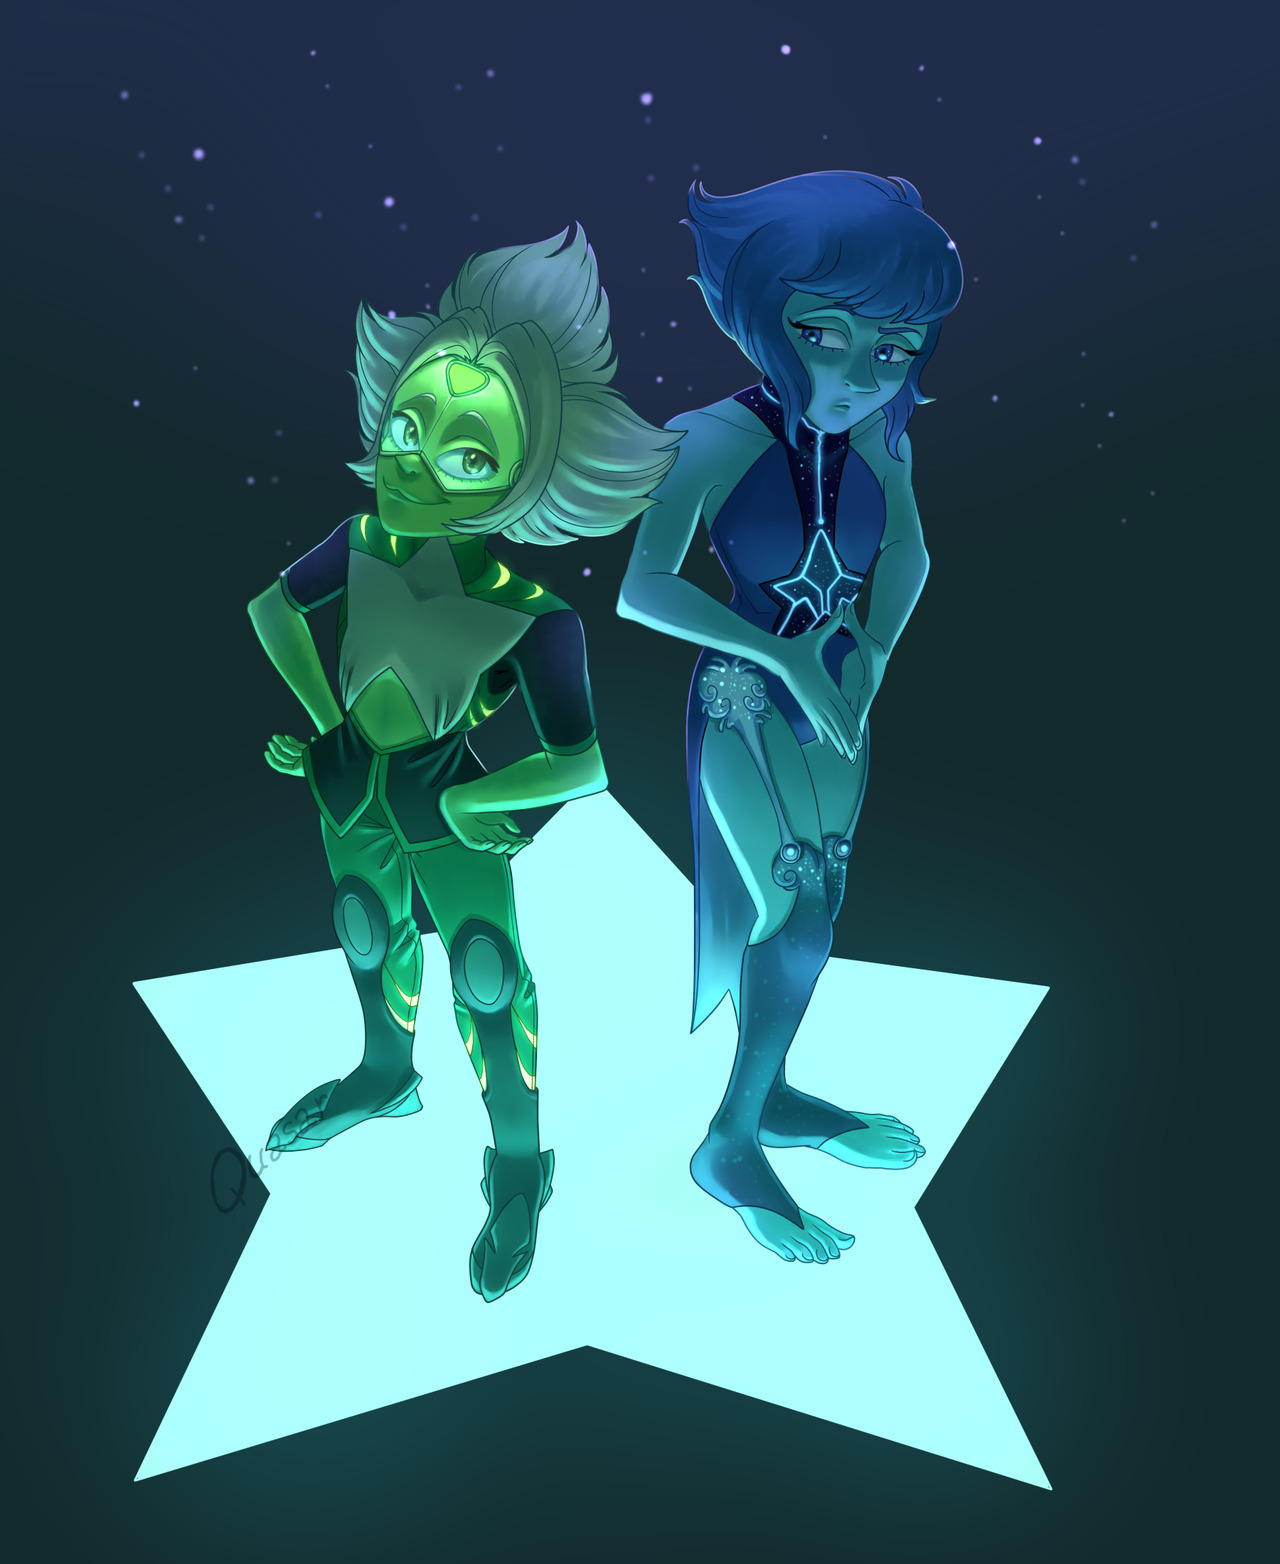 My version of CG outfits for Peridot and Lapis